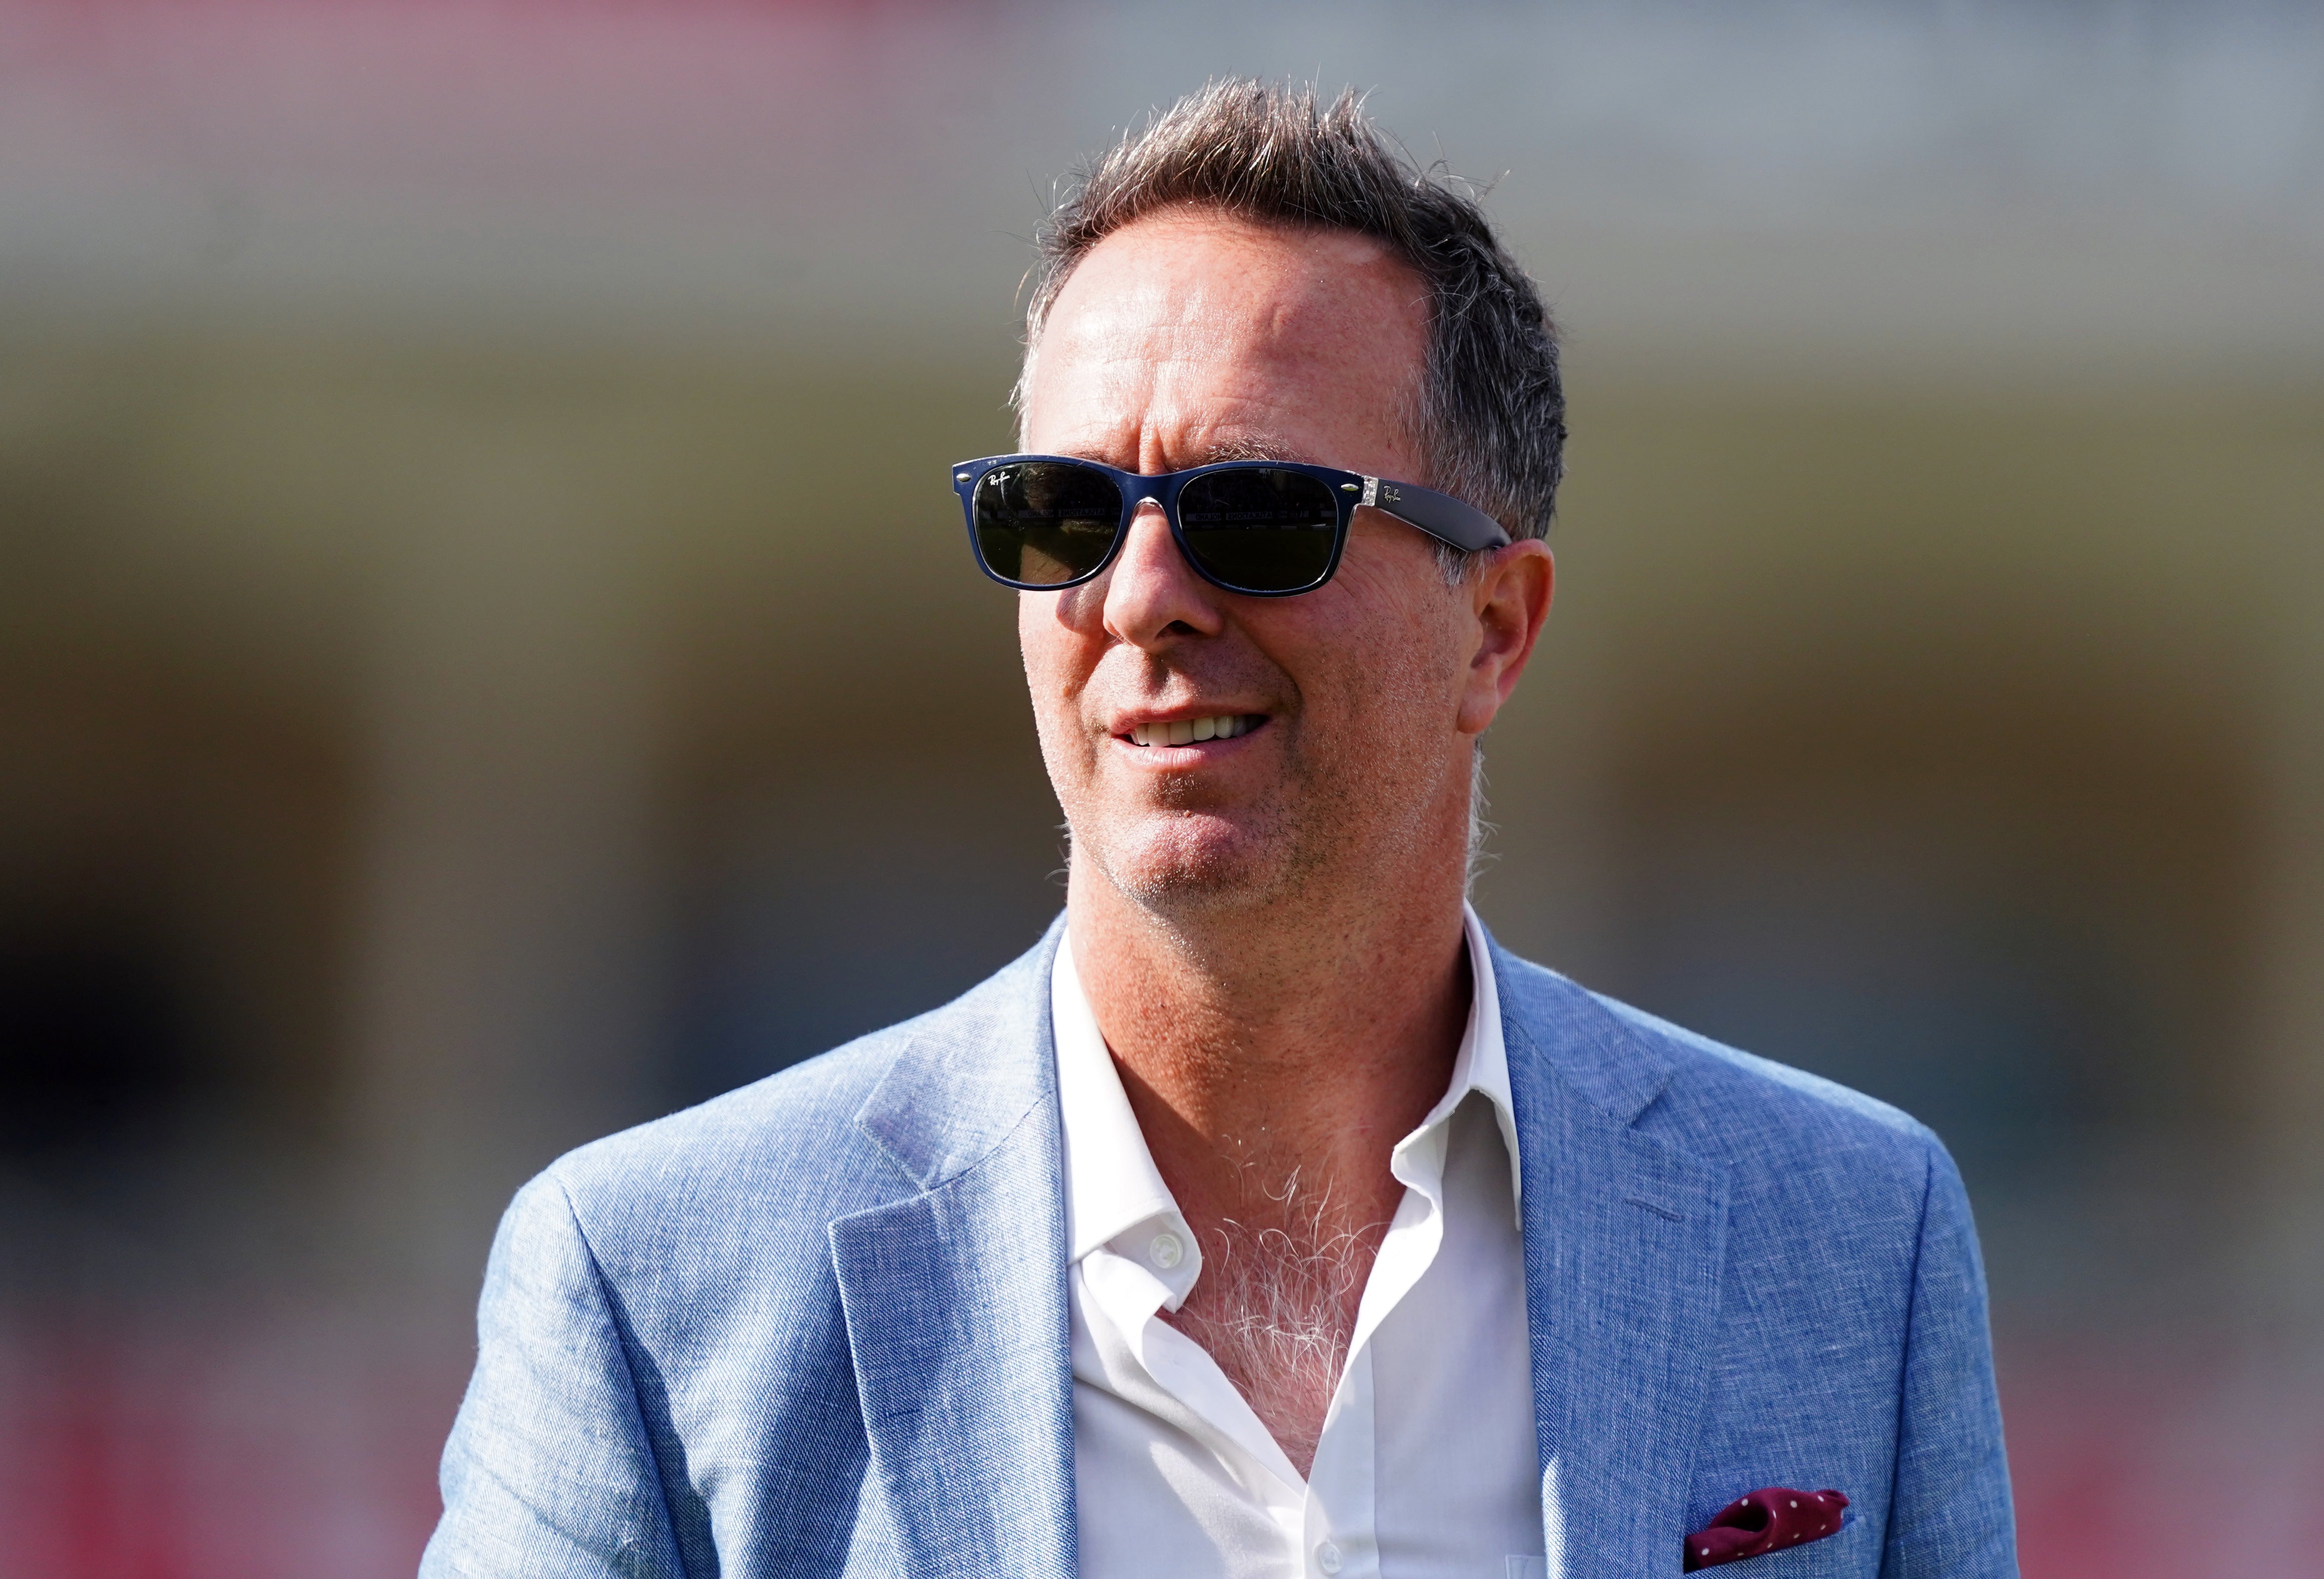 Michael Vaughan has been part of the BBC’s commentary team for the third Test between England and New Zealand